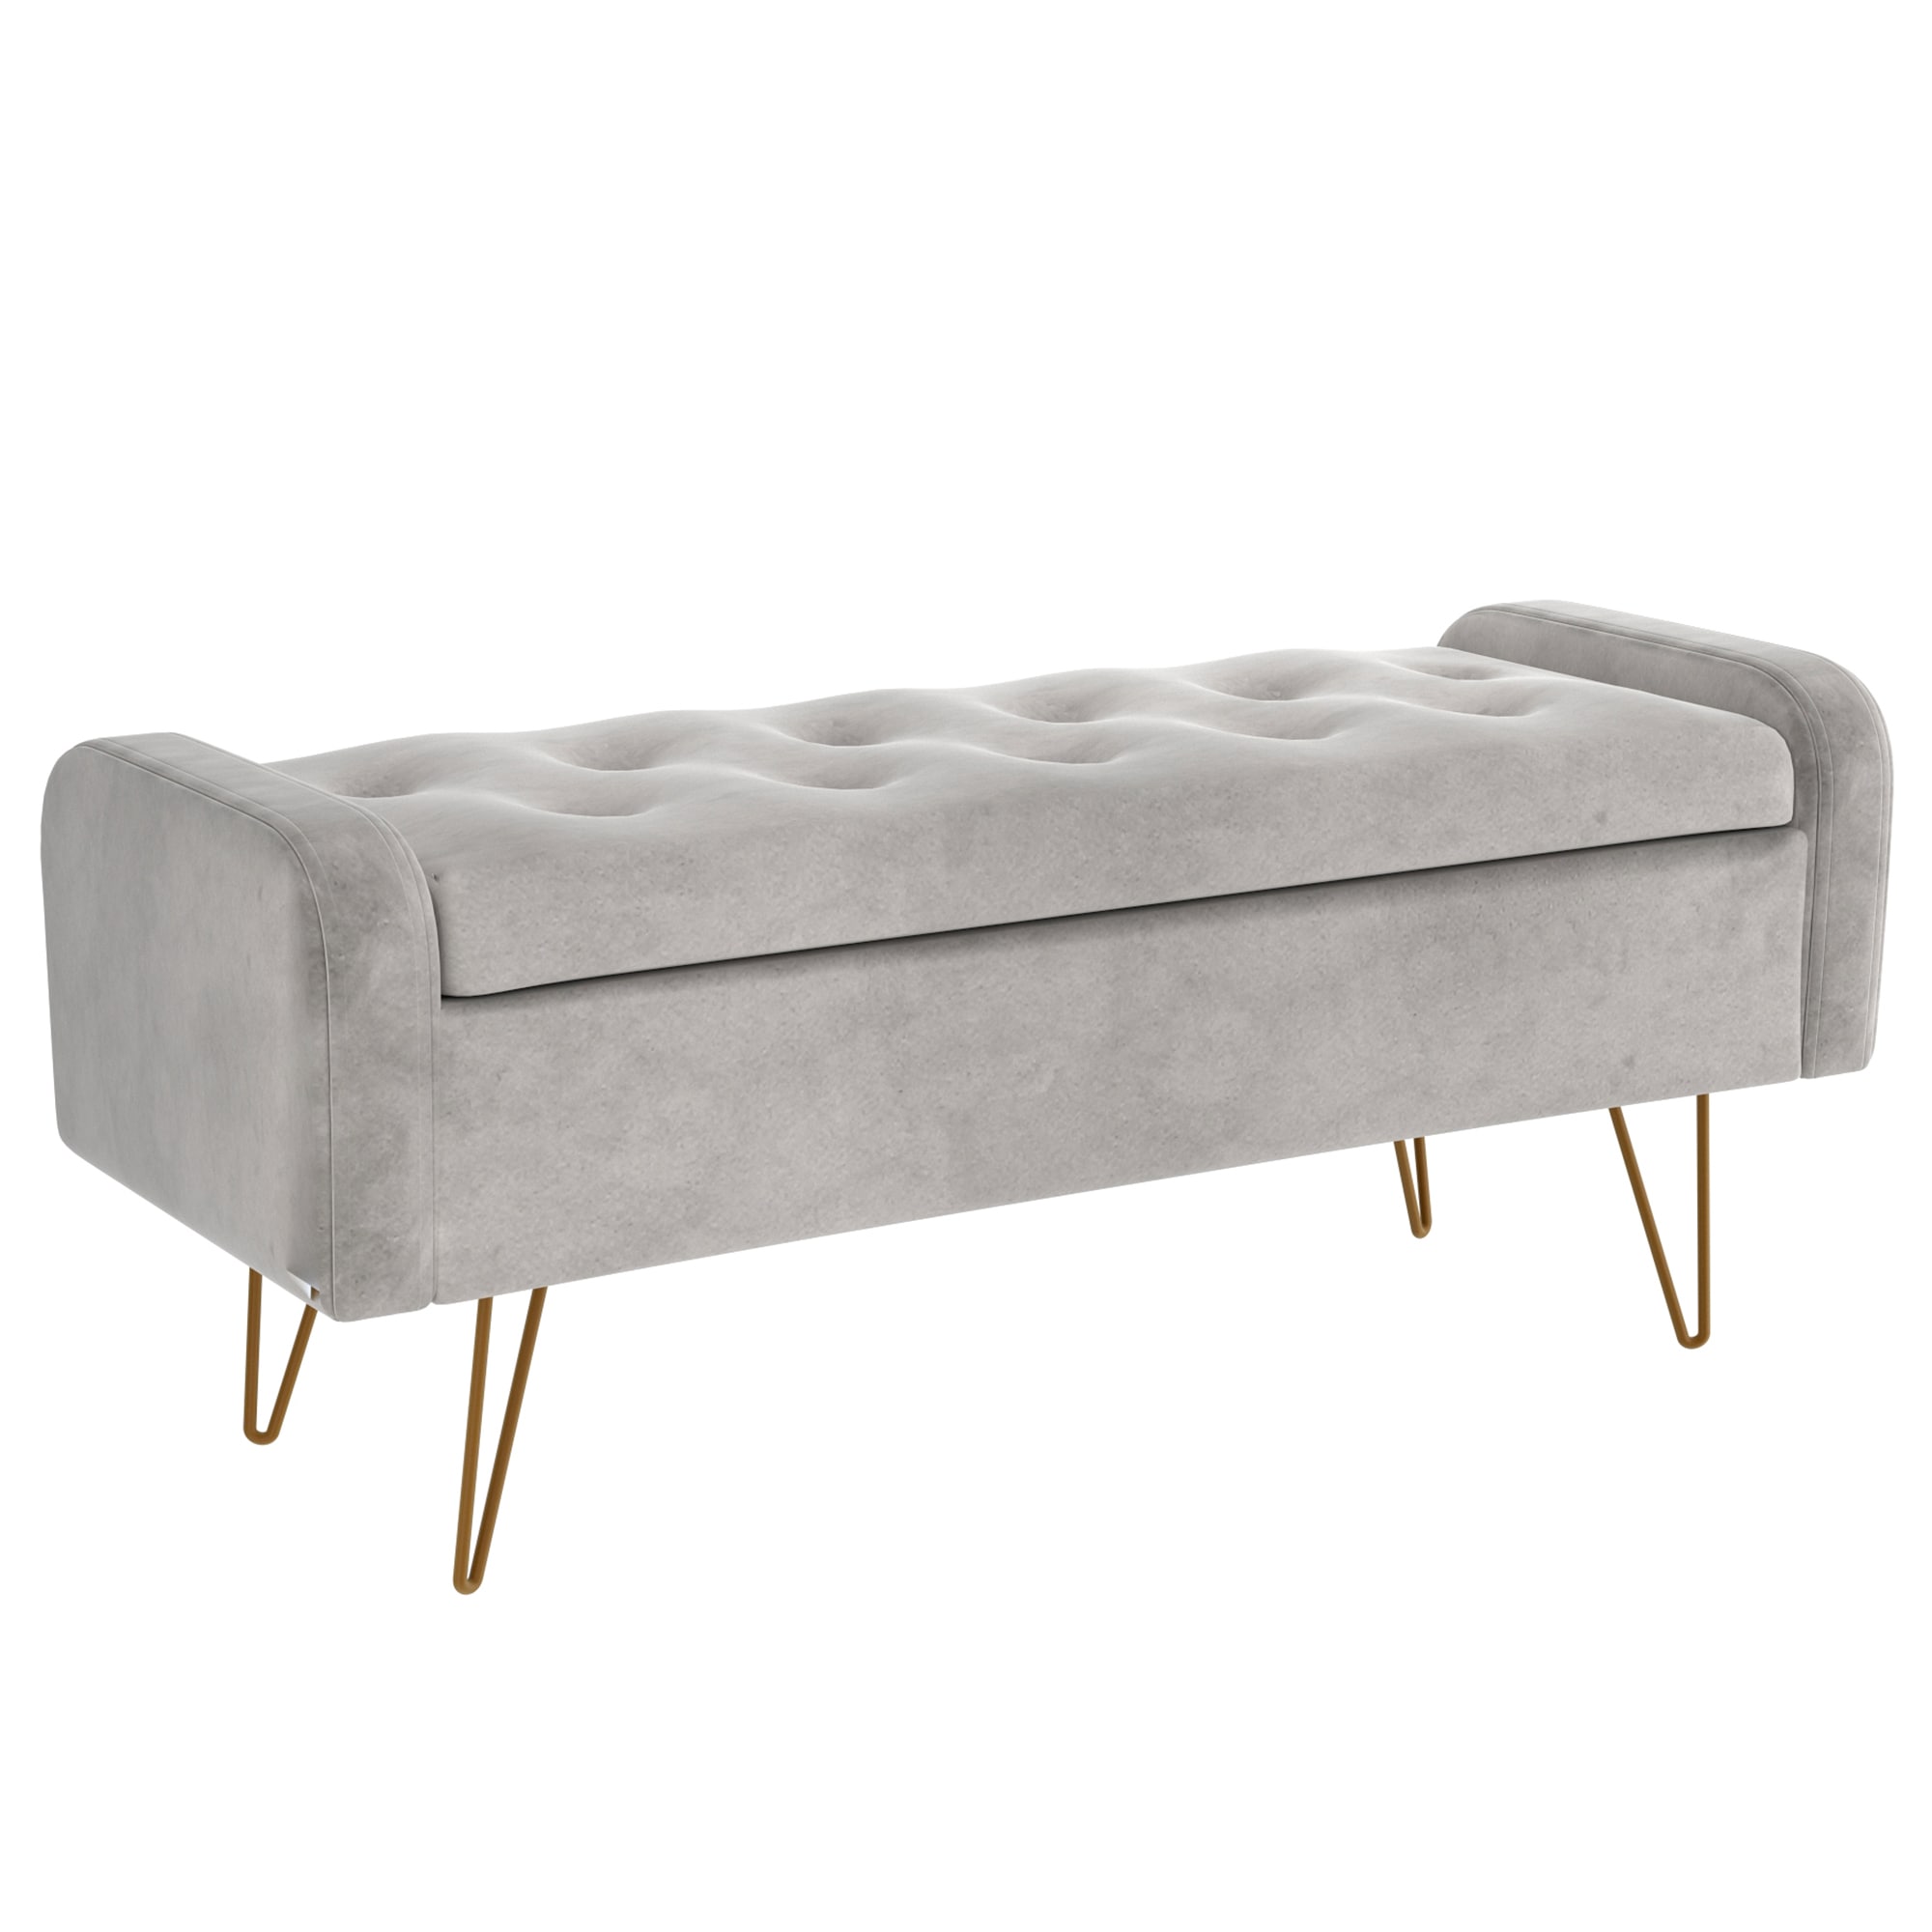 Inspire Sabel 402-549GRY/GL Storage Ottoman/Bench In Grey with Gold Leg